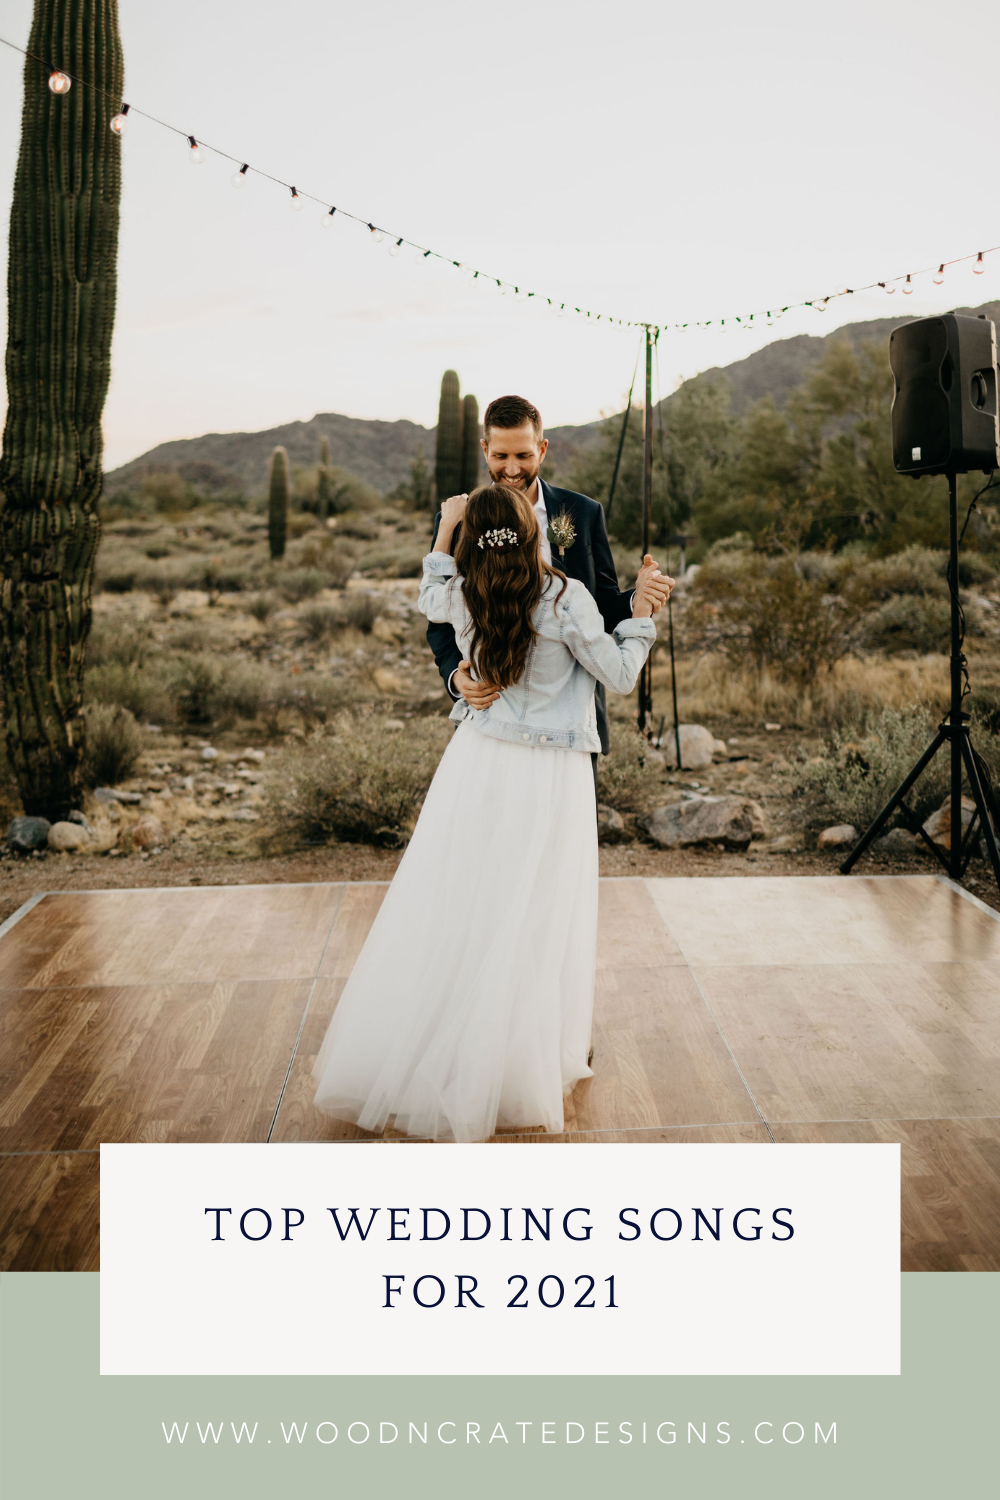 Top Wedding Song Suggestions for 2021